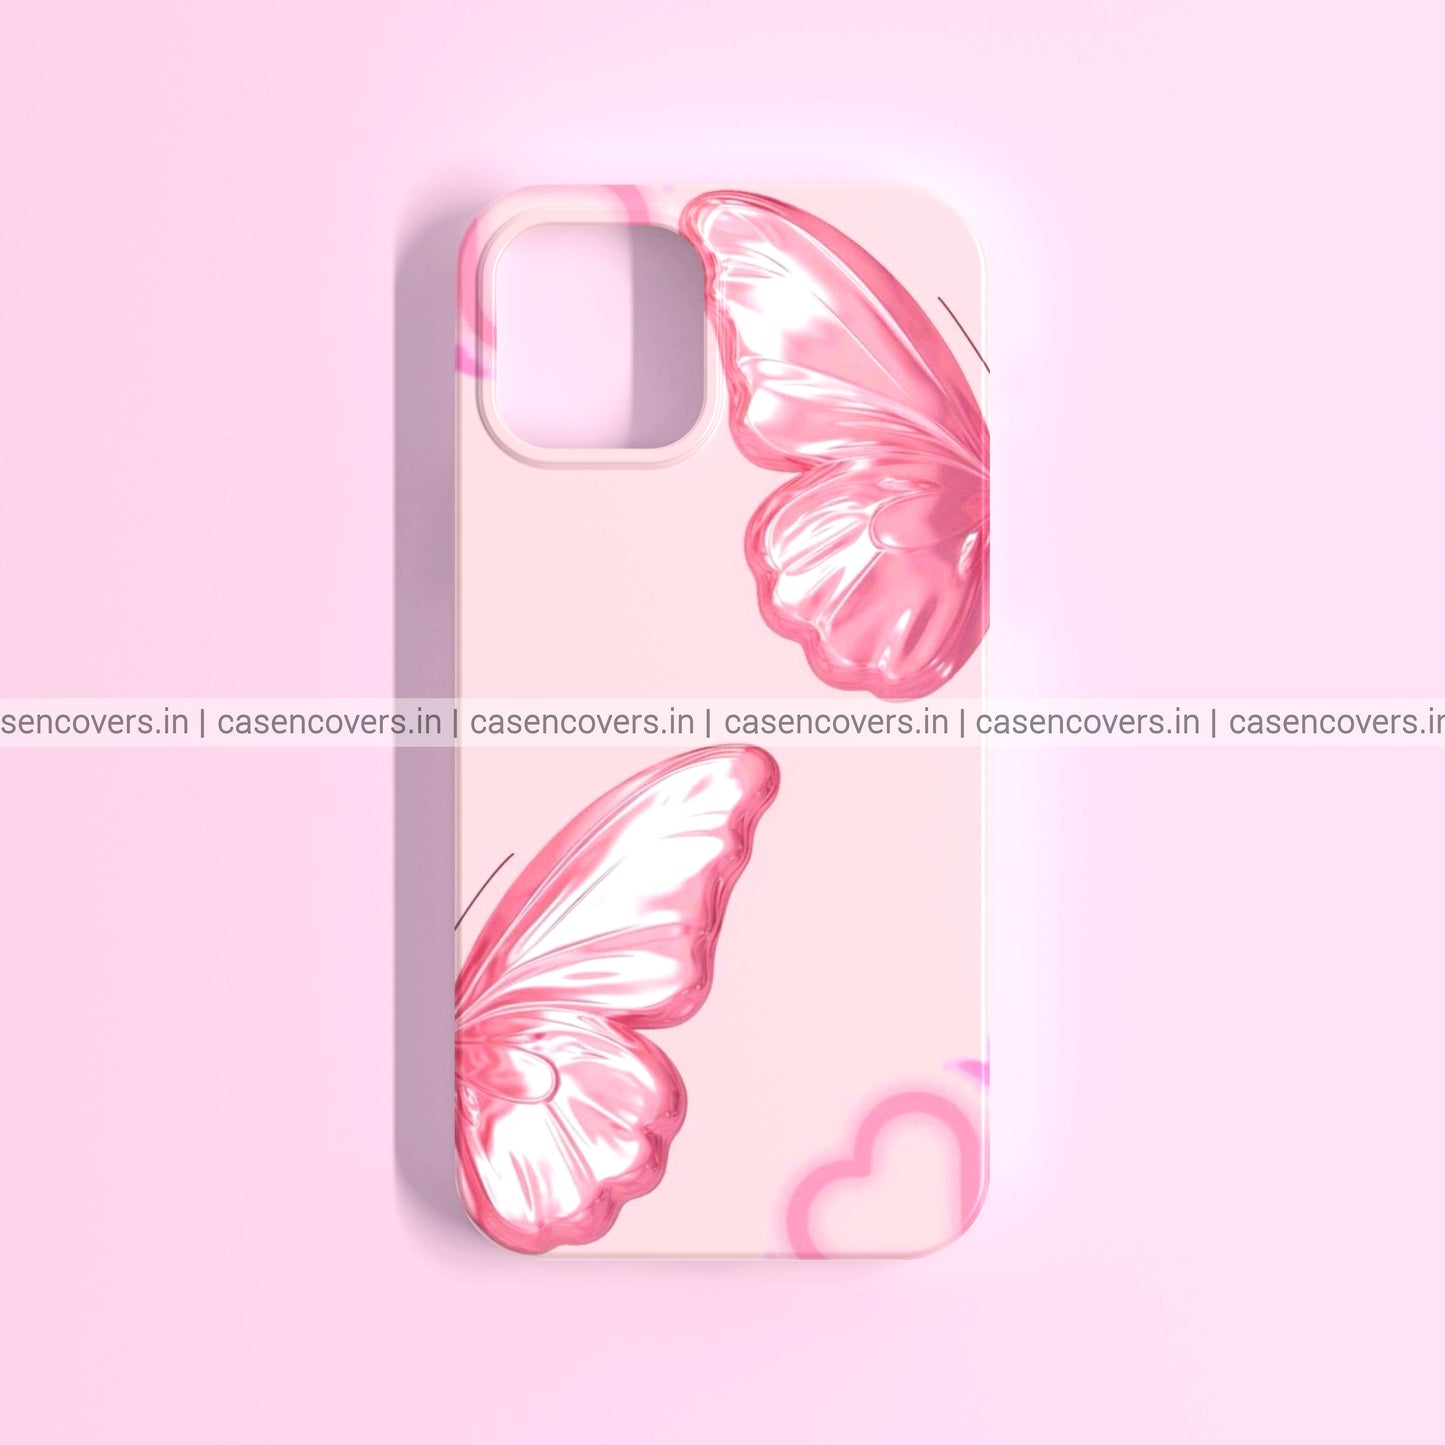 Pink Butterfly Phone Case